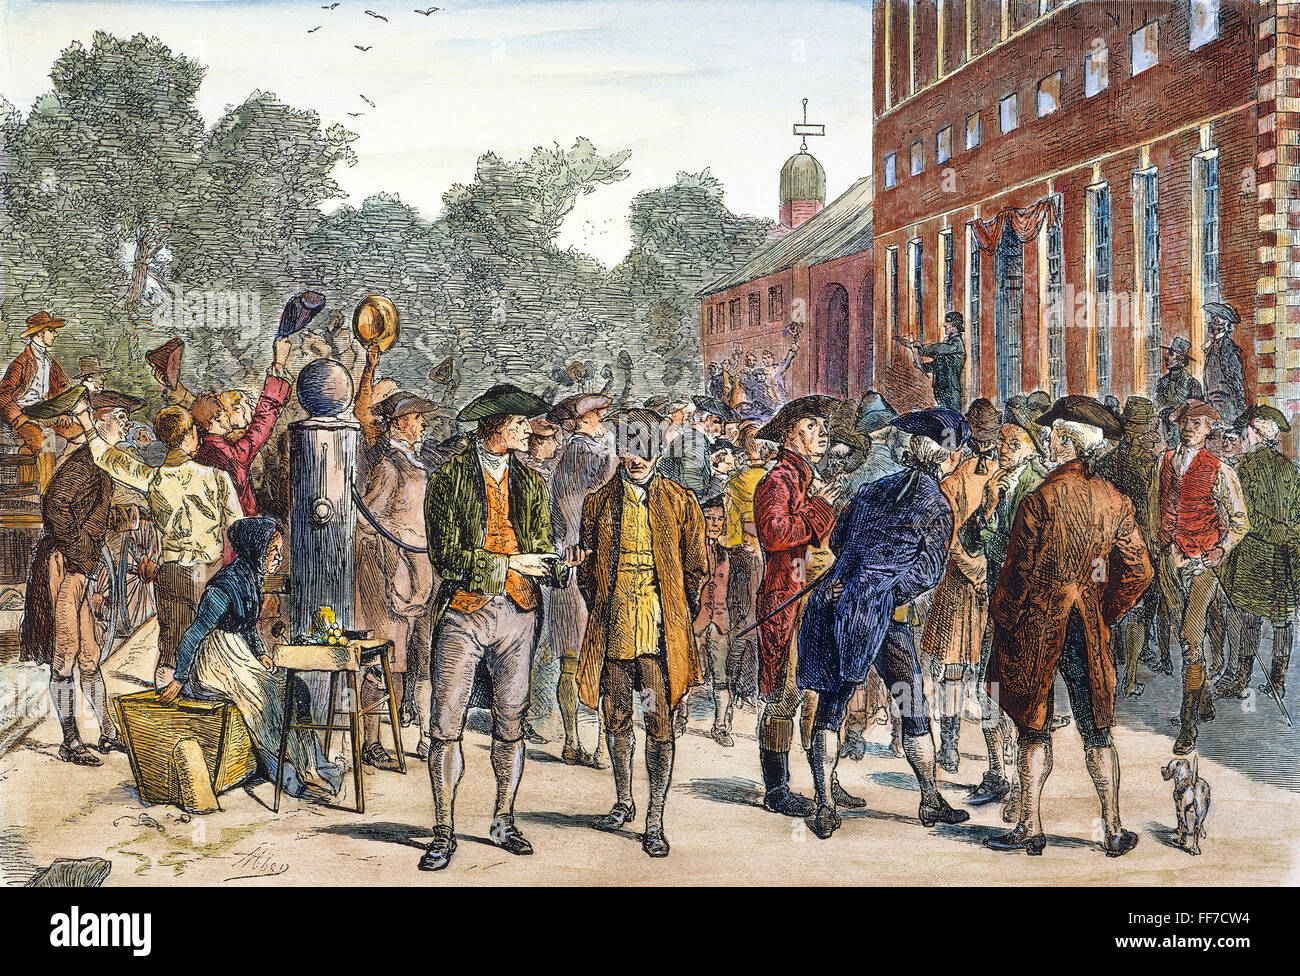 JOHN NIXON, 1776. /nJohn Nixon giving the first public reading of the Declaration of Independence from the steps of Independence Hall in Philadelphia, Pennsylvania, on 8 July 1776. Color engraving after Edwin Austin Abbey. Stock Photo